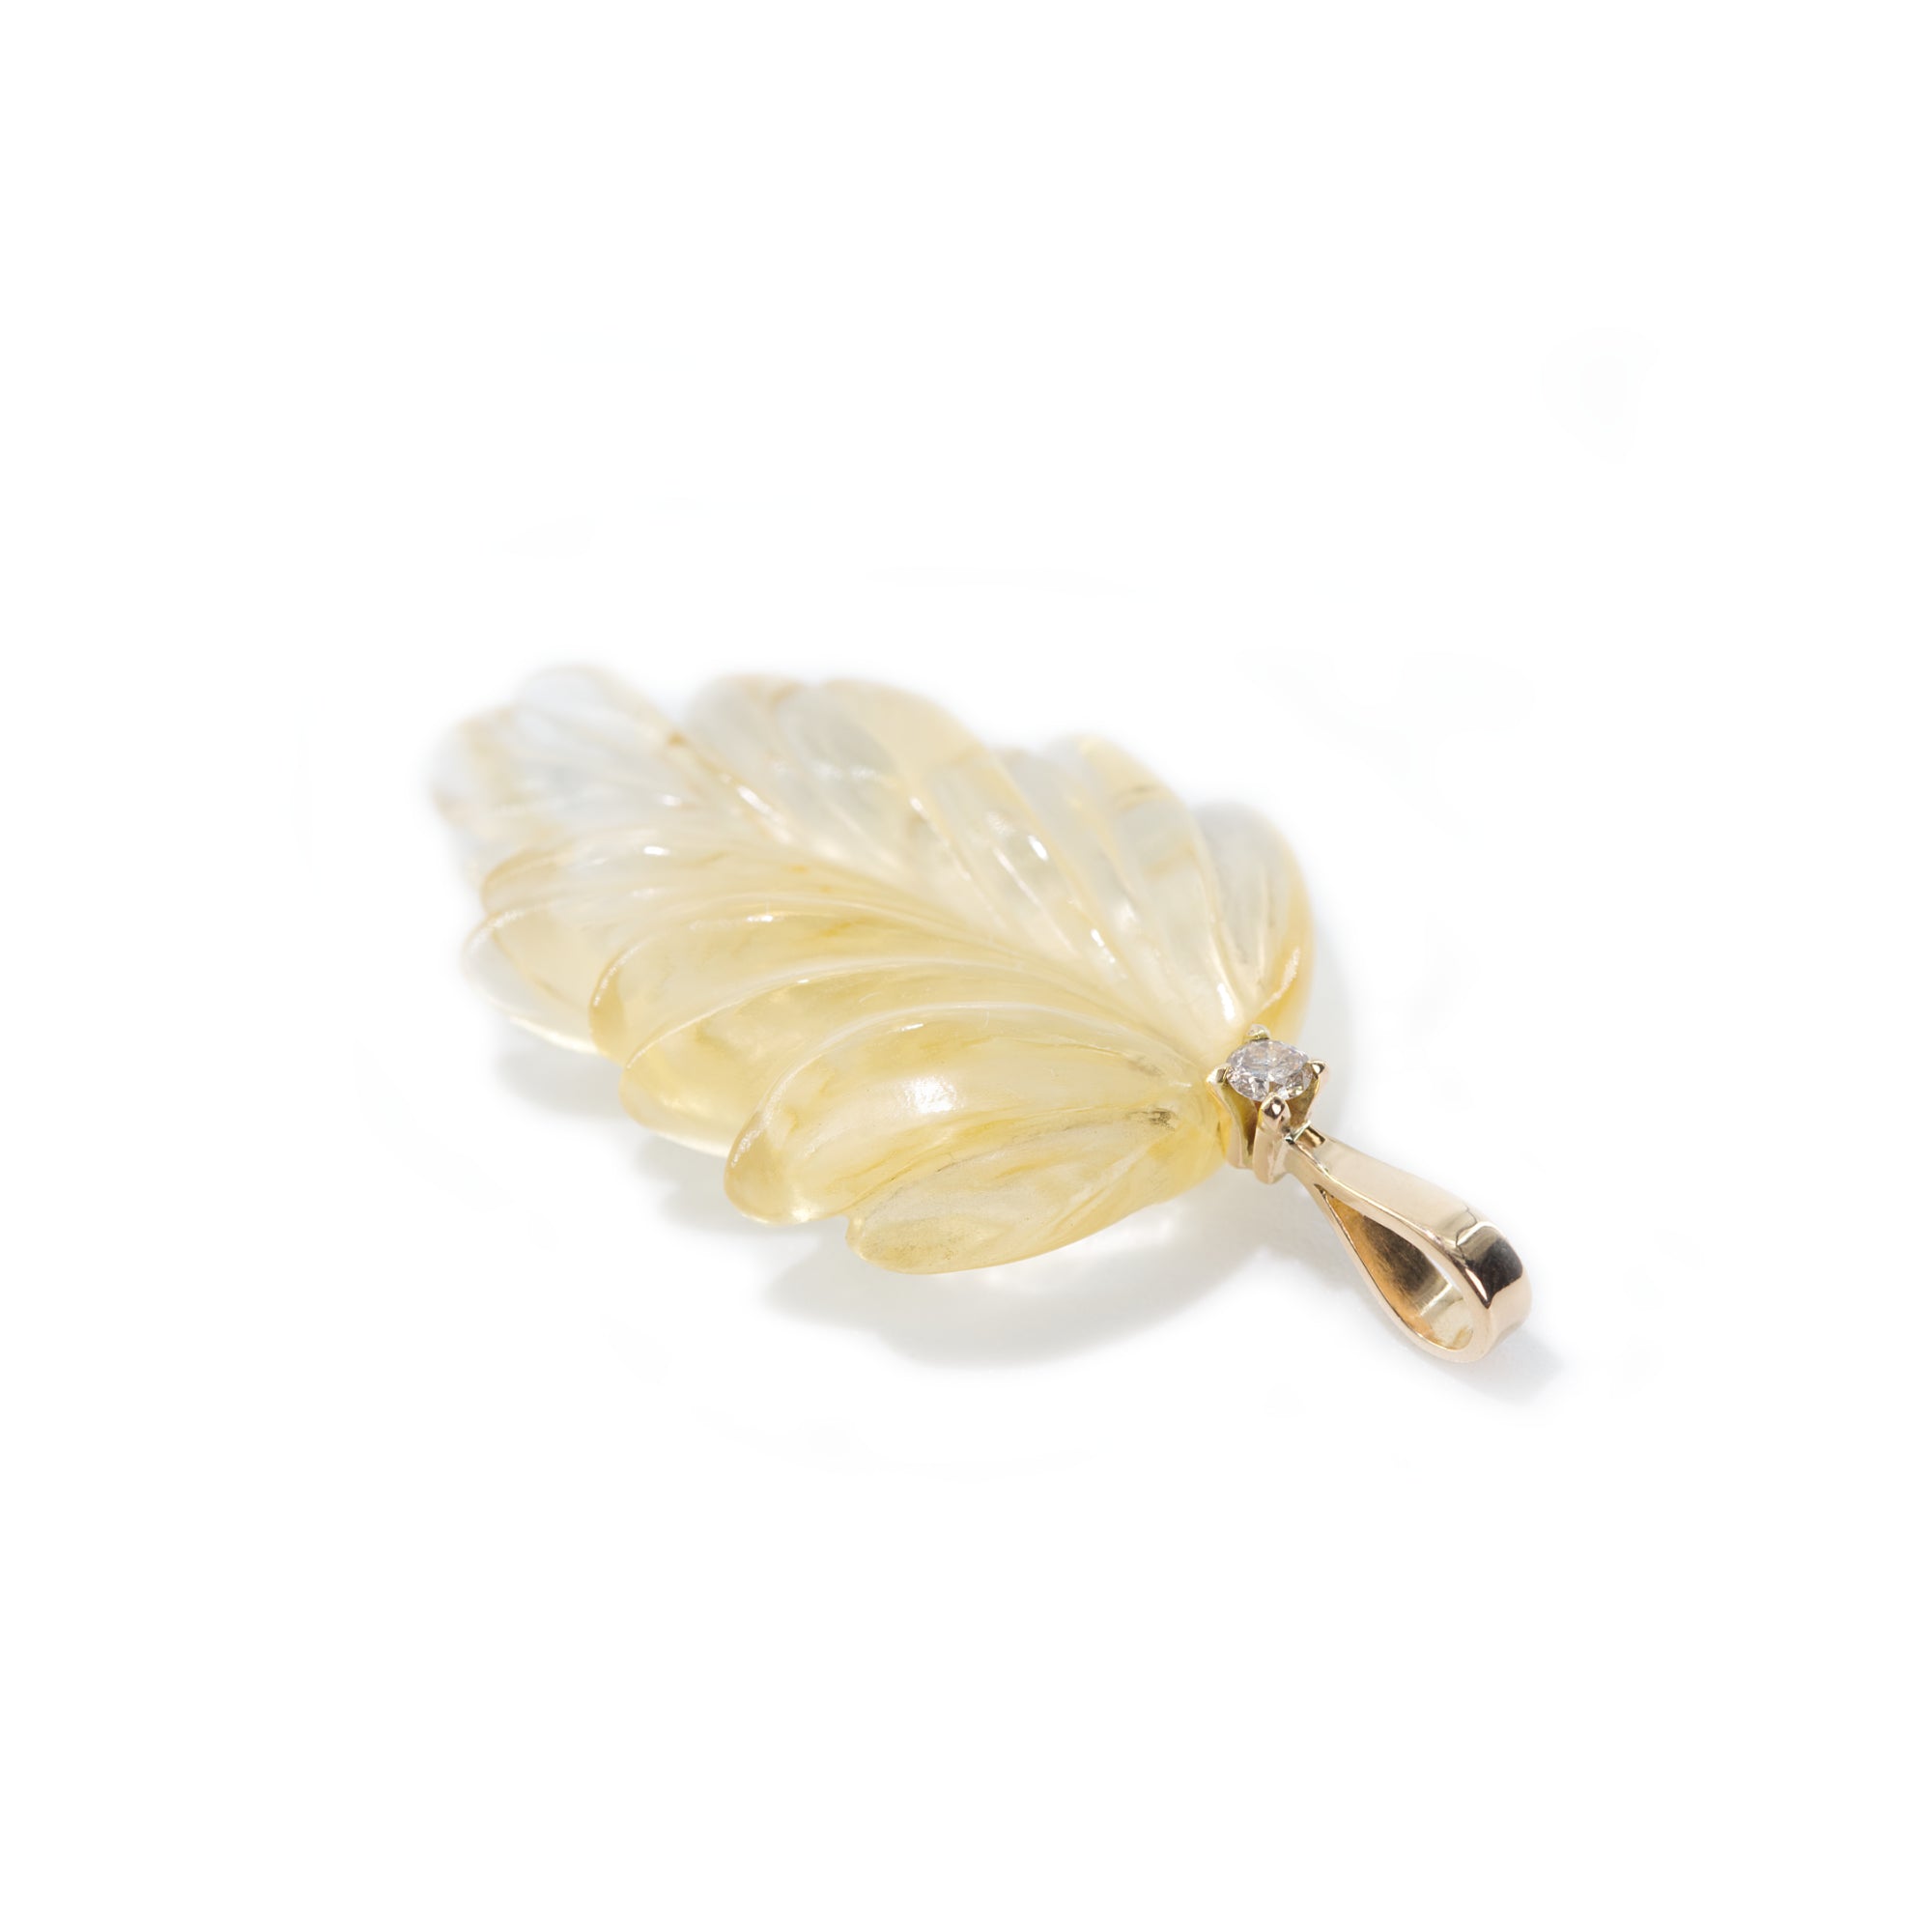 The photo features hand-carved citrine leaf pendant. The pendant is placed on the side to present the bail of the pendant which is made of 18K gold and finished with light brown diamond.